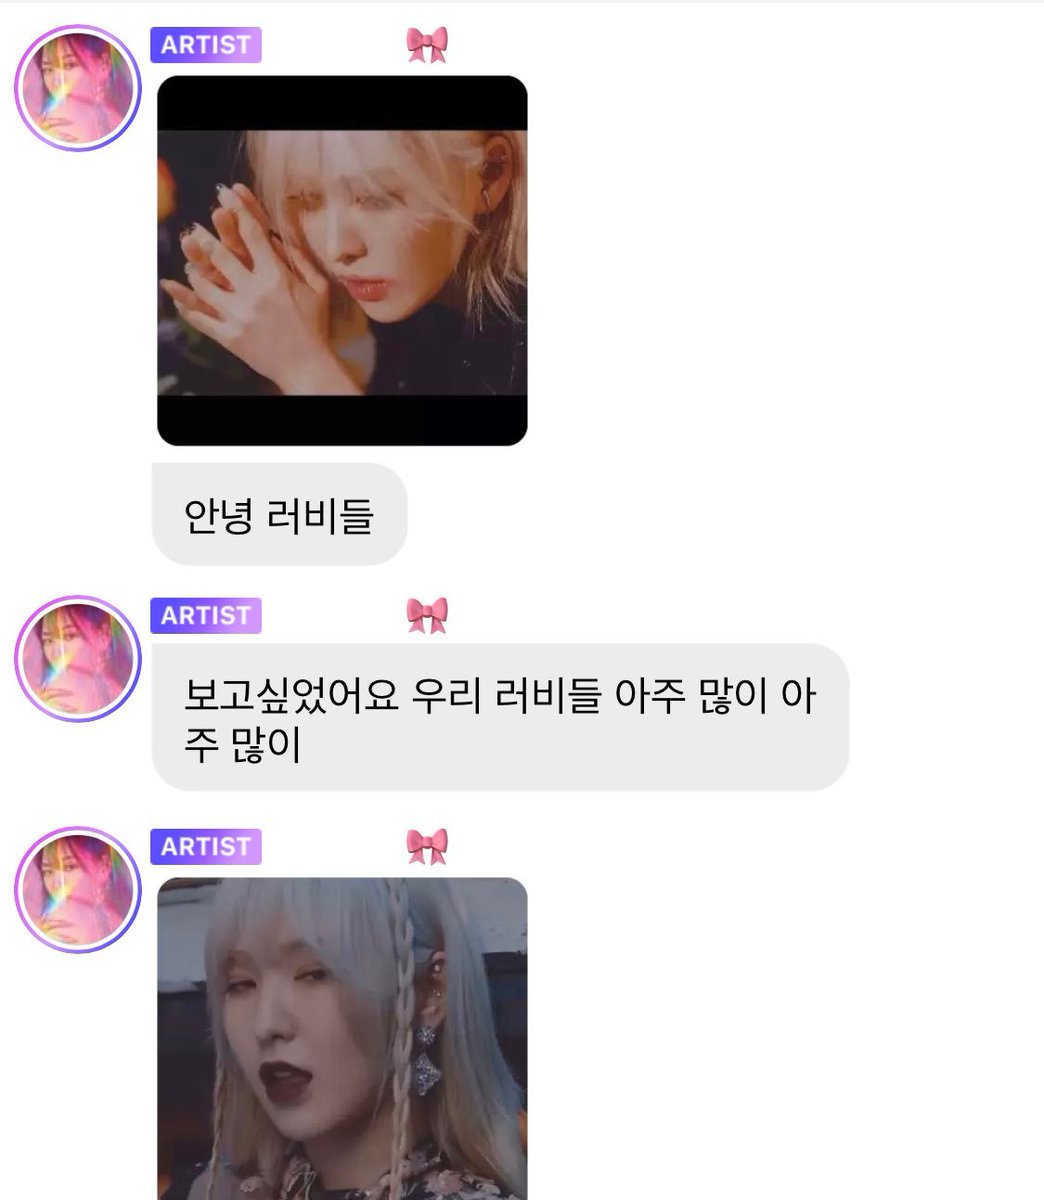 WAIT WAS SHE SENDING GIFS OF HERSELF IN PSYCHO MV WITH THESE MESSAGES... LOL  #OurWendyIsHere  @RVsmtown